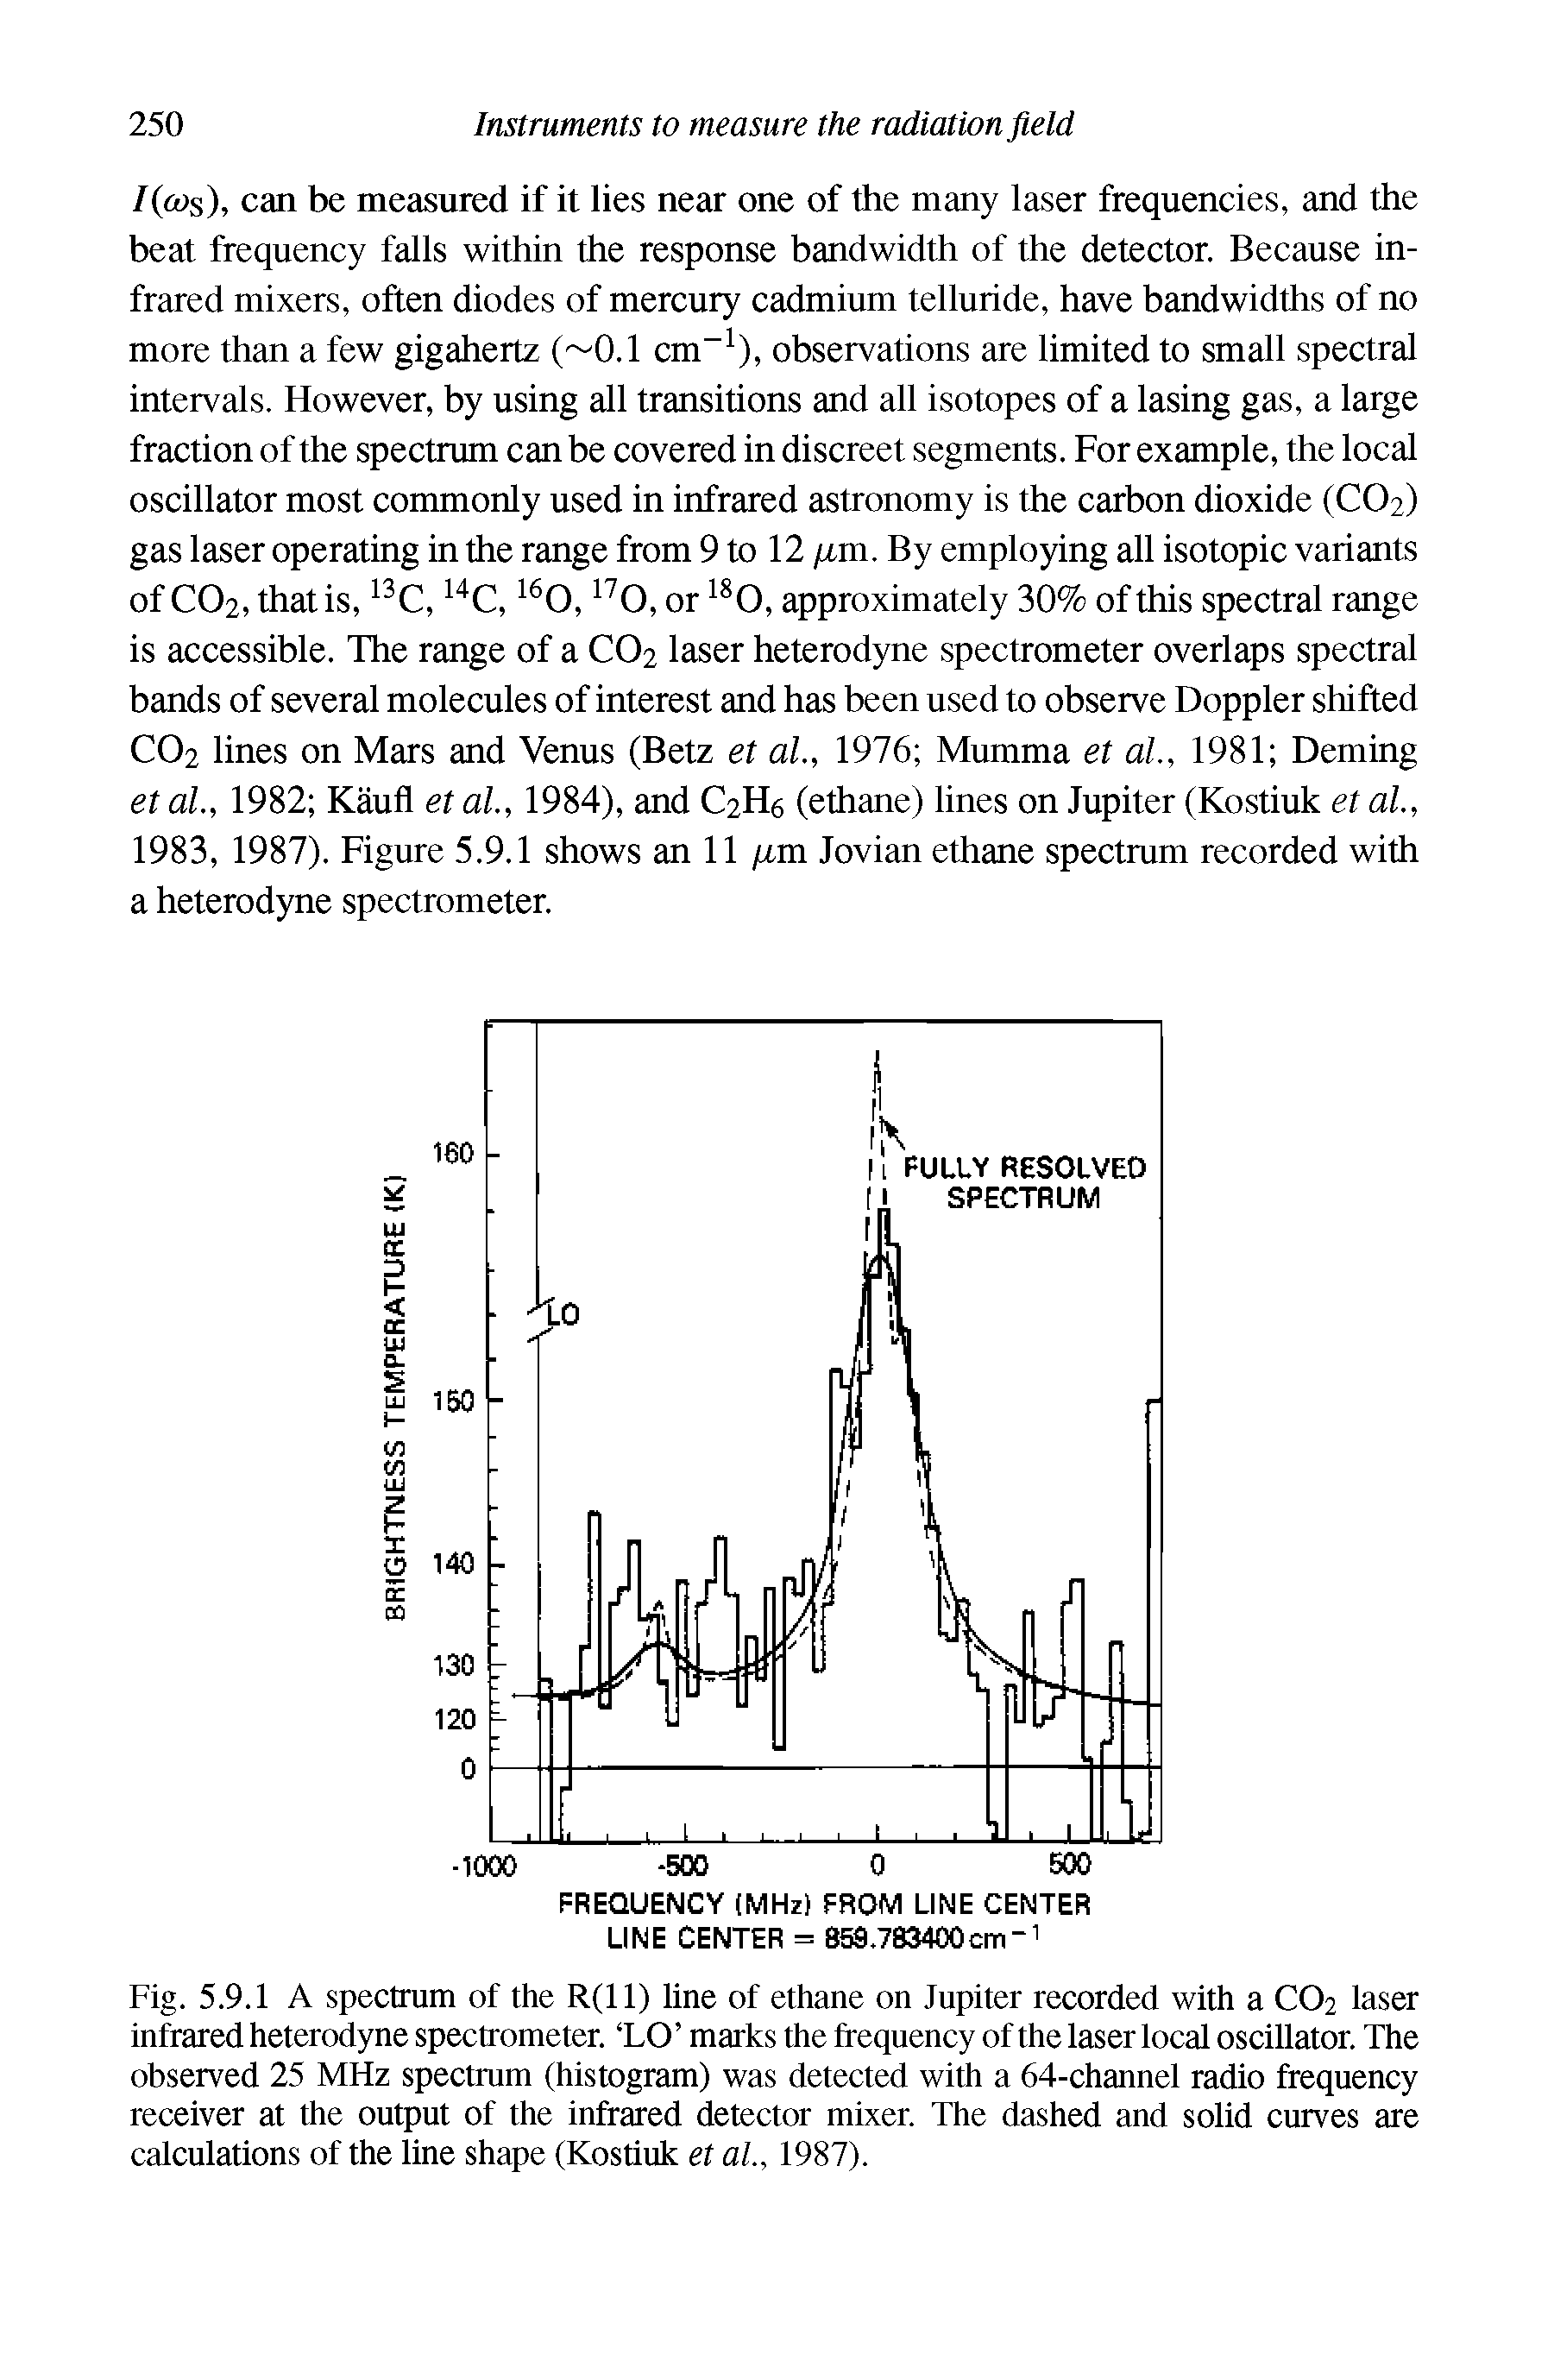 Fig. 5.9.1 A spectmm of the R(ll) line of ethane on Jupiter recorded with a CO2 laser infrared heterodyne spectrometer. LO marks the frequency of the laser local oscillator. The observed 25 MHz spectmm (histogram) was detected with a 64-channel radio frequency receiver at the output of the infrared detector mixer. The dashed and solid curves are calculations of the line shape (Kostiuk et al, 1987).